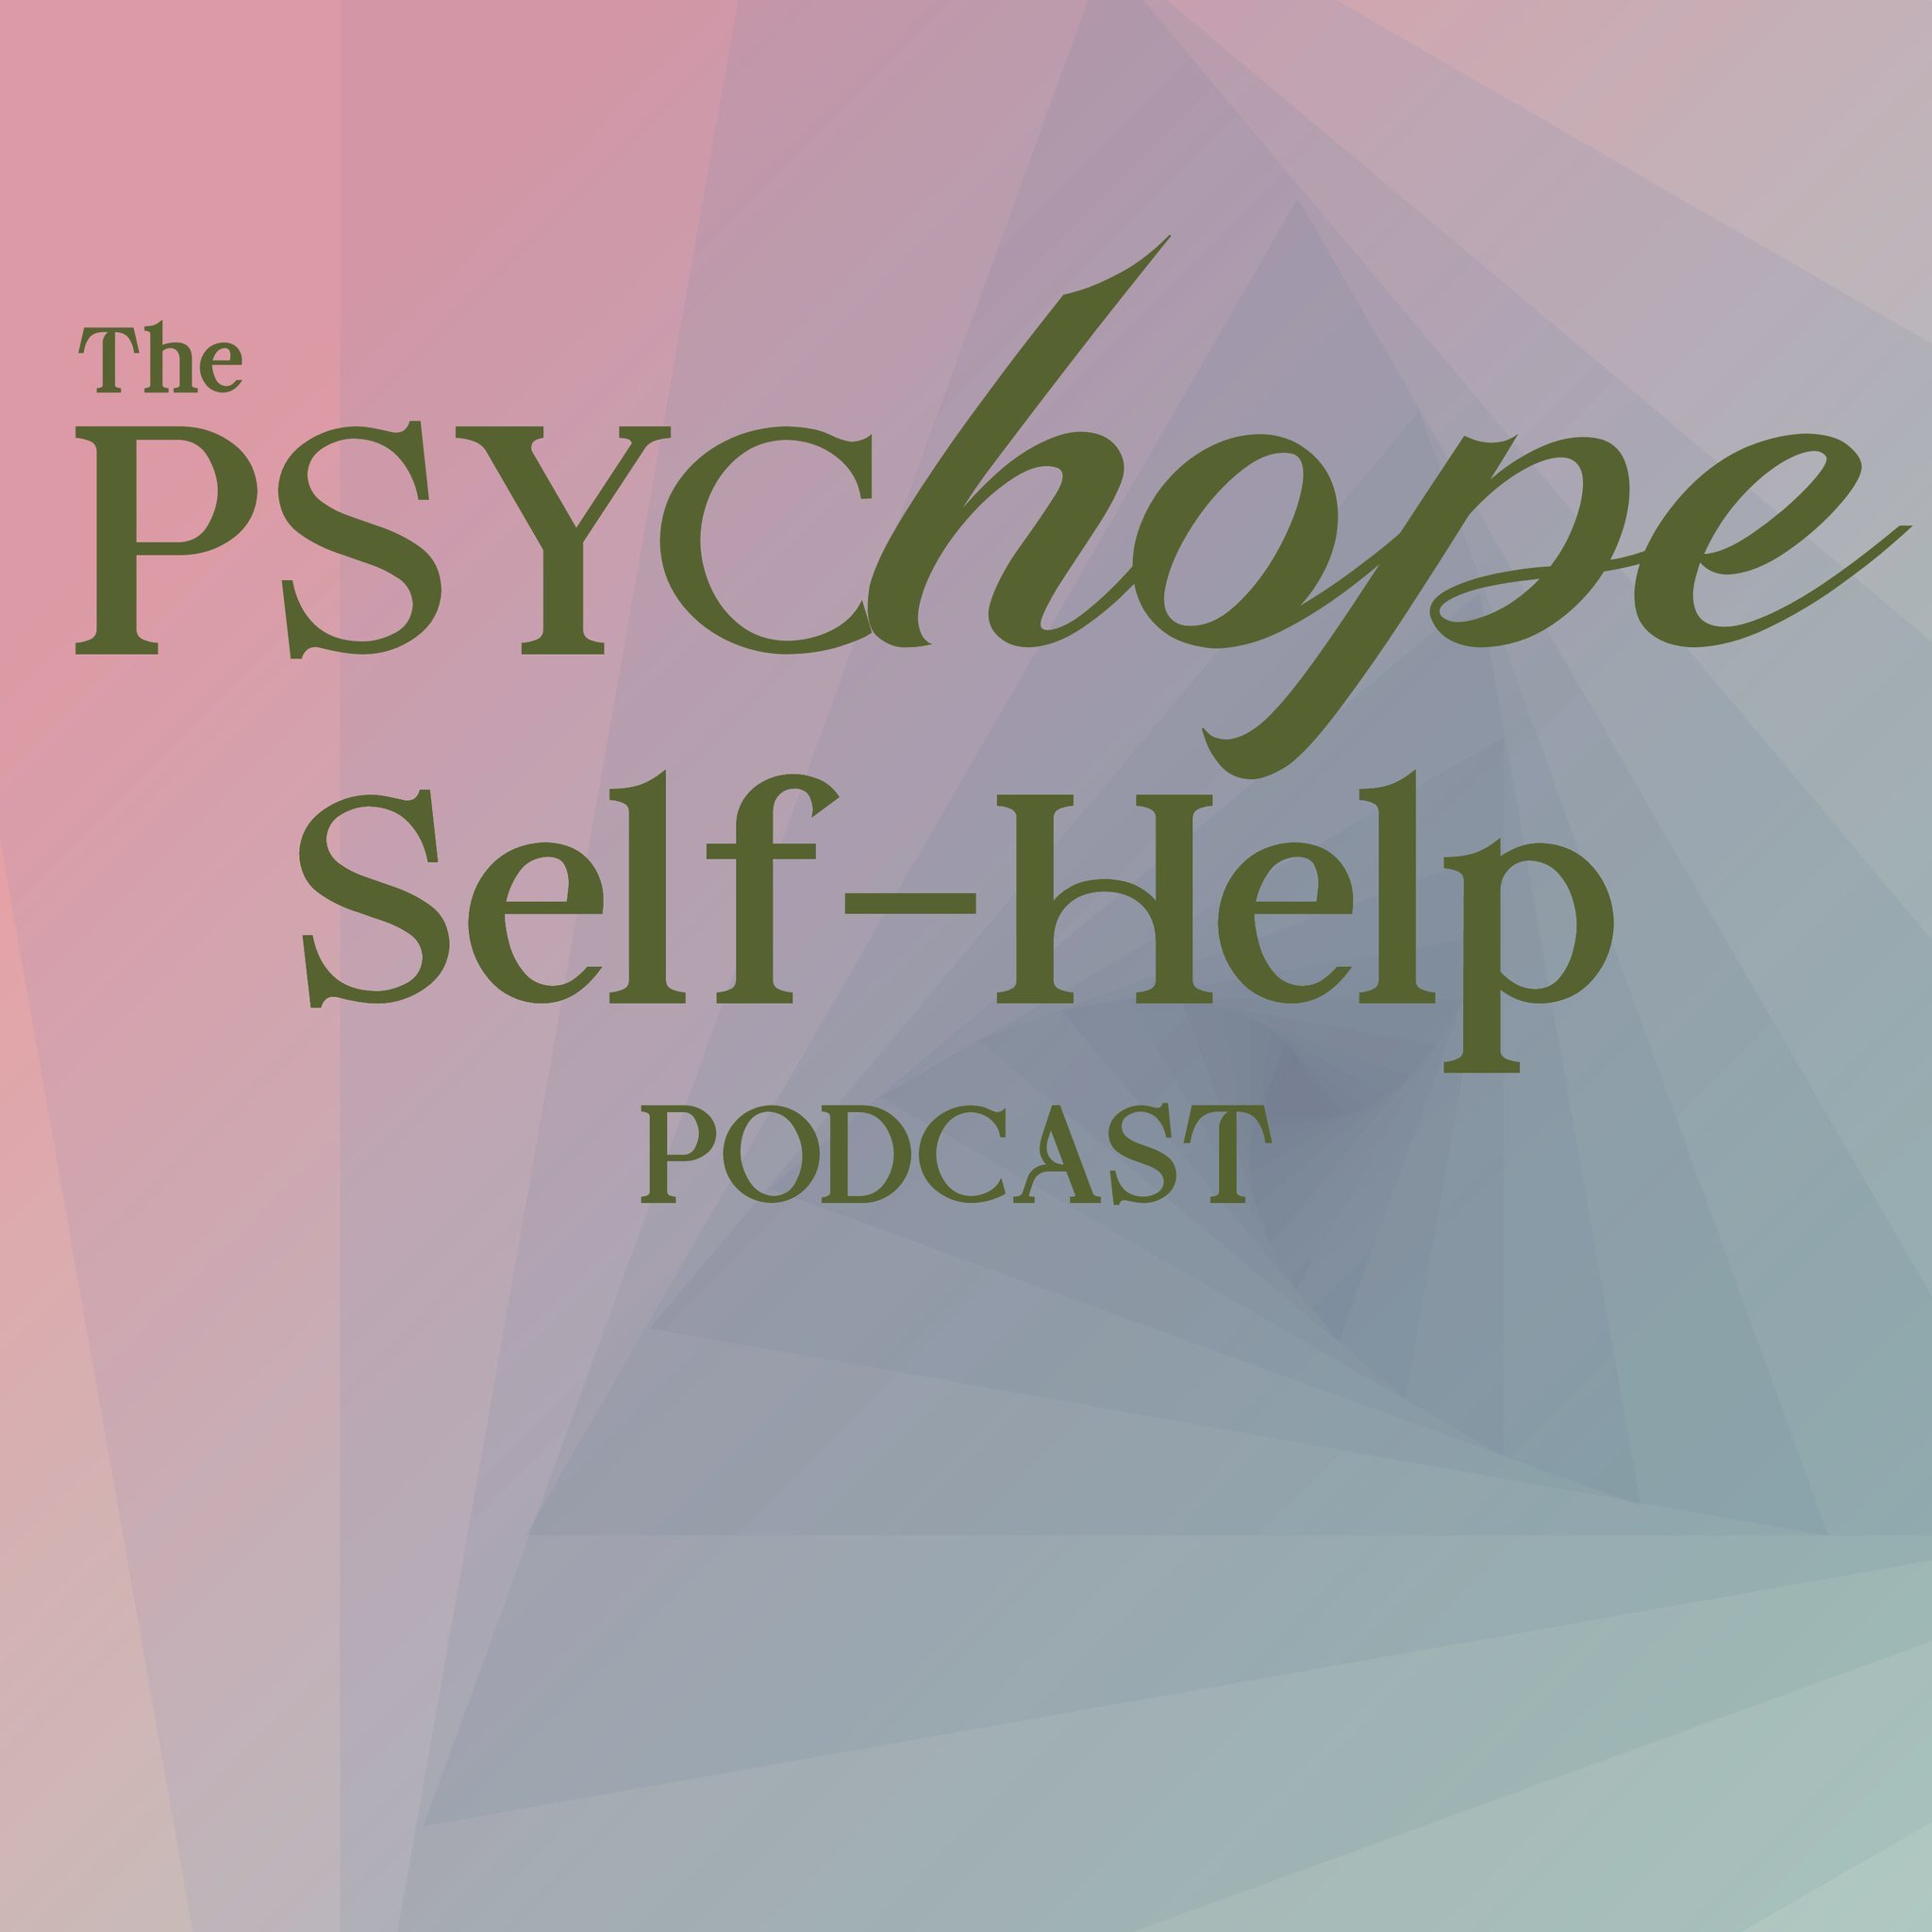 🎉 Exciting News! 🎉 The PsycHope Self-Help Podcast is now on YouTube! 🎧✨

🌟 We're delighted to announce that the PsycHope Self-Help Podcast, your go-to space for women where psychology lights up paths to healing, hope, and personal growth, is now 